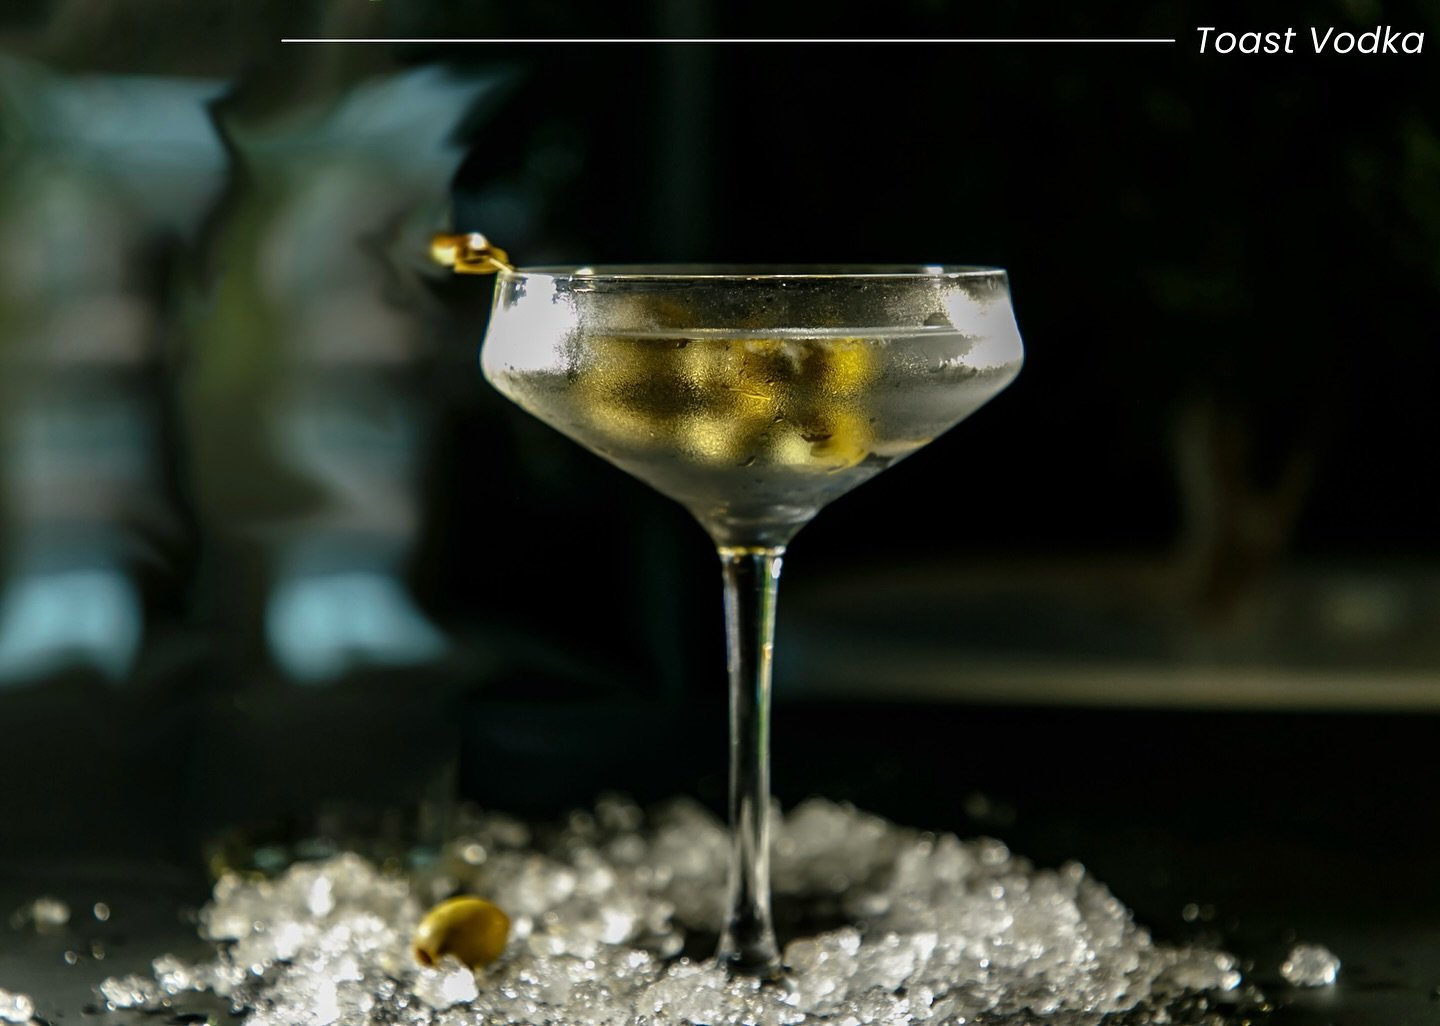 Savoring the smooth sophistication of Toast Vodka, straight up with a twist. 🍸✨ Add some olives for the perfect balance of flavor and elegance.Toast to indulging in the finer things in life! 🫒 

#ToastToElegance #toasttolifetolovetous #toastvodka